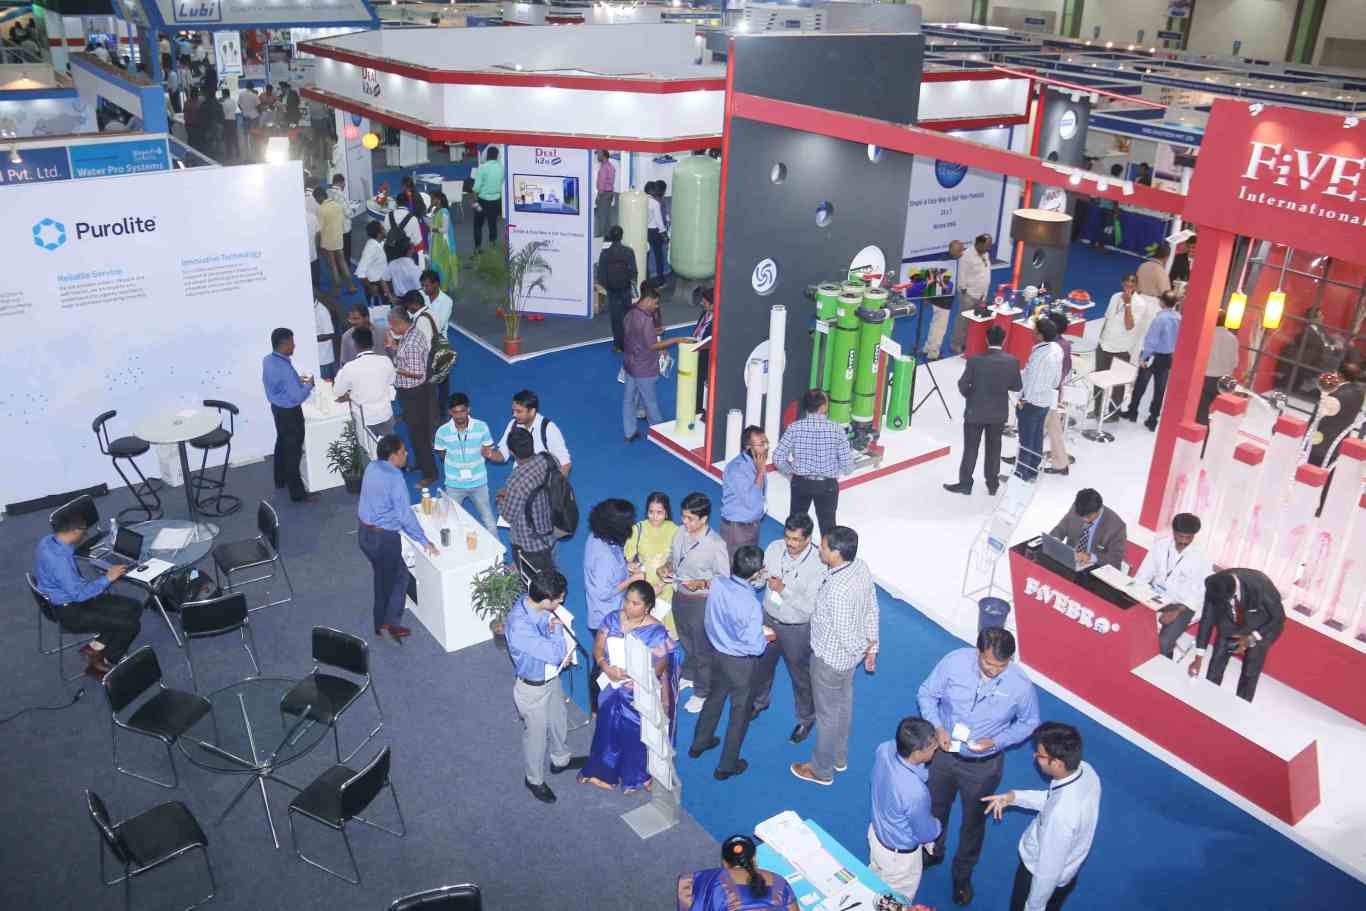 WELCOME TO WATER EXPO 2019, Chennai, Tamil Nadu, India